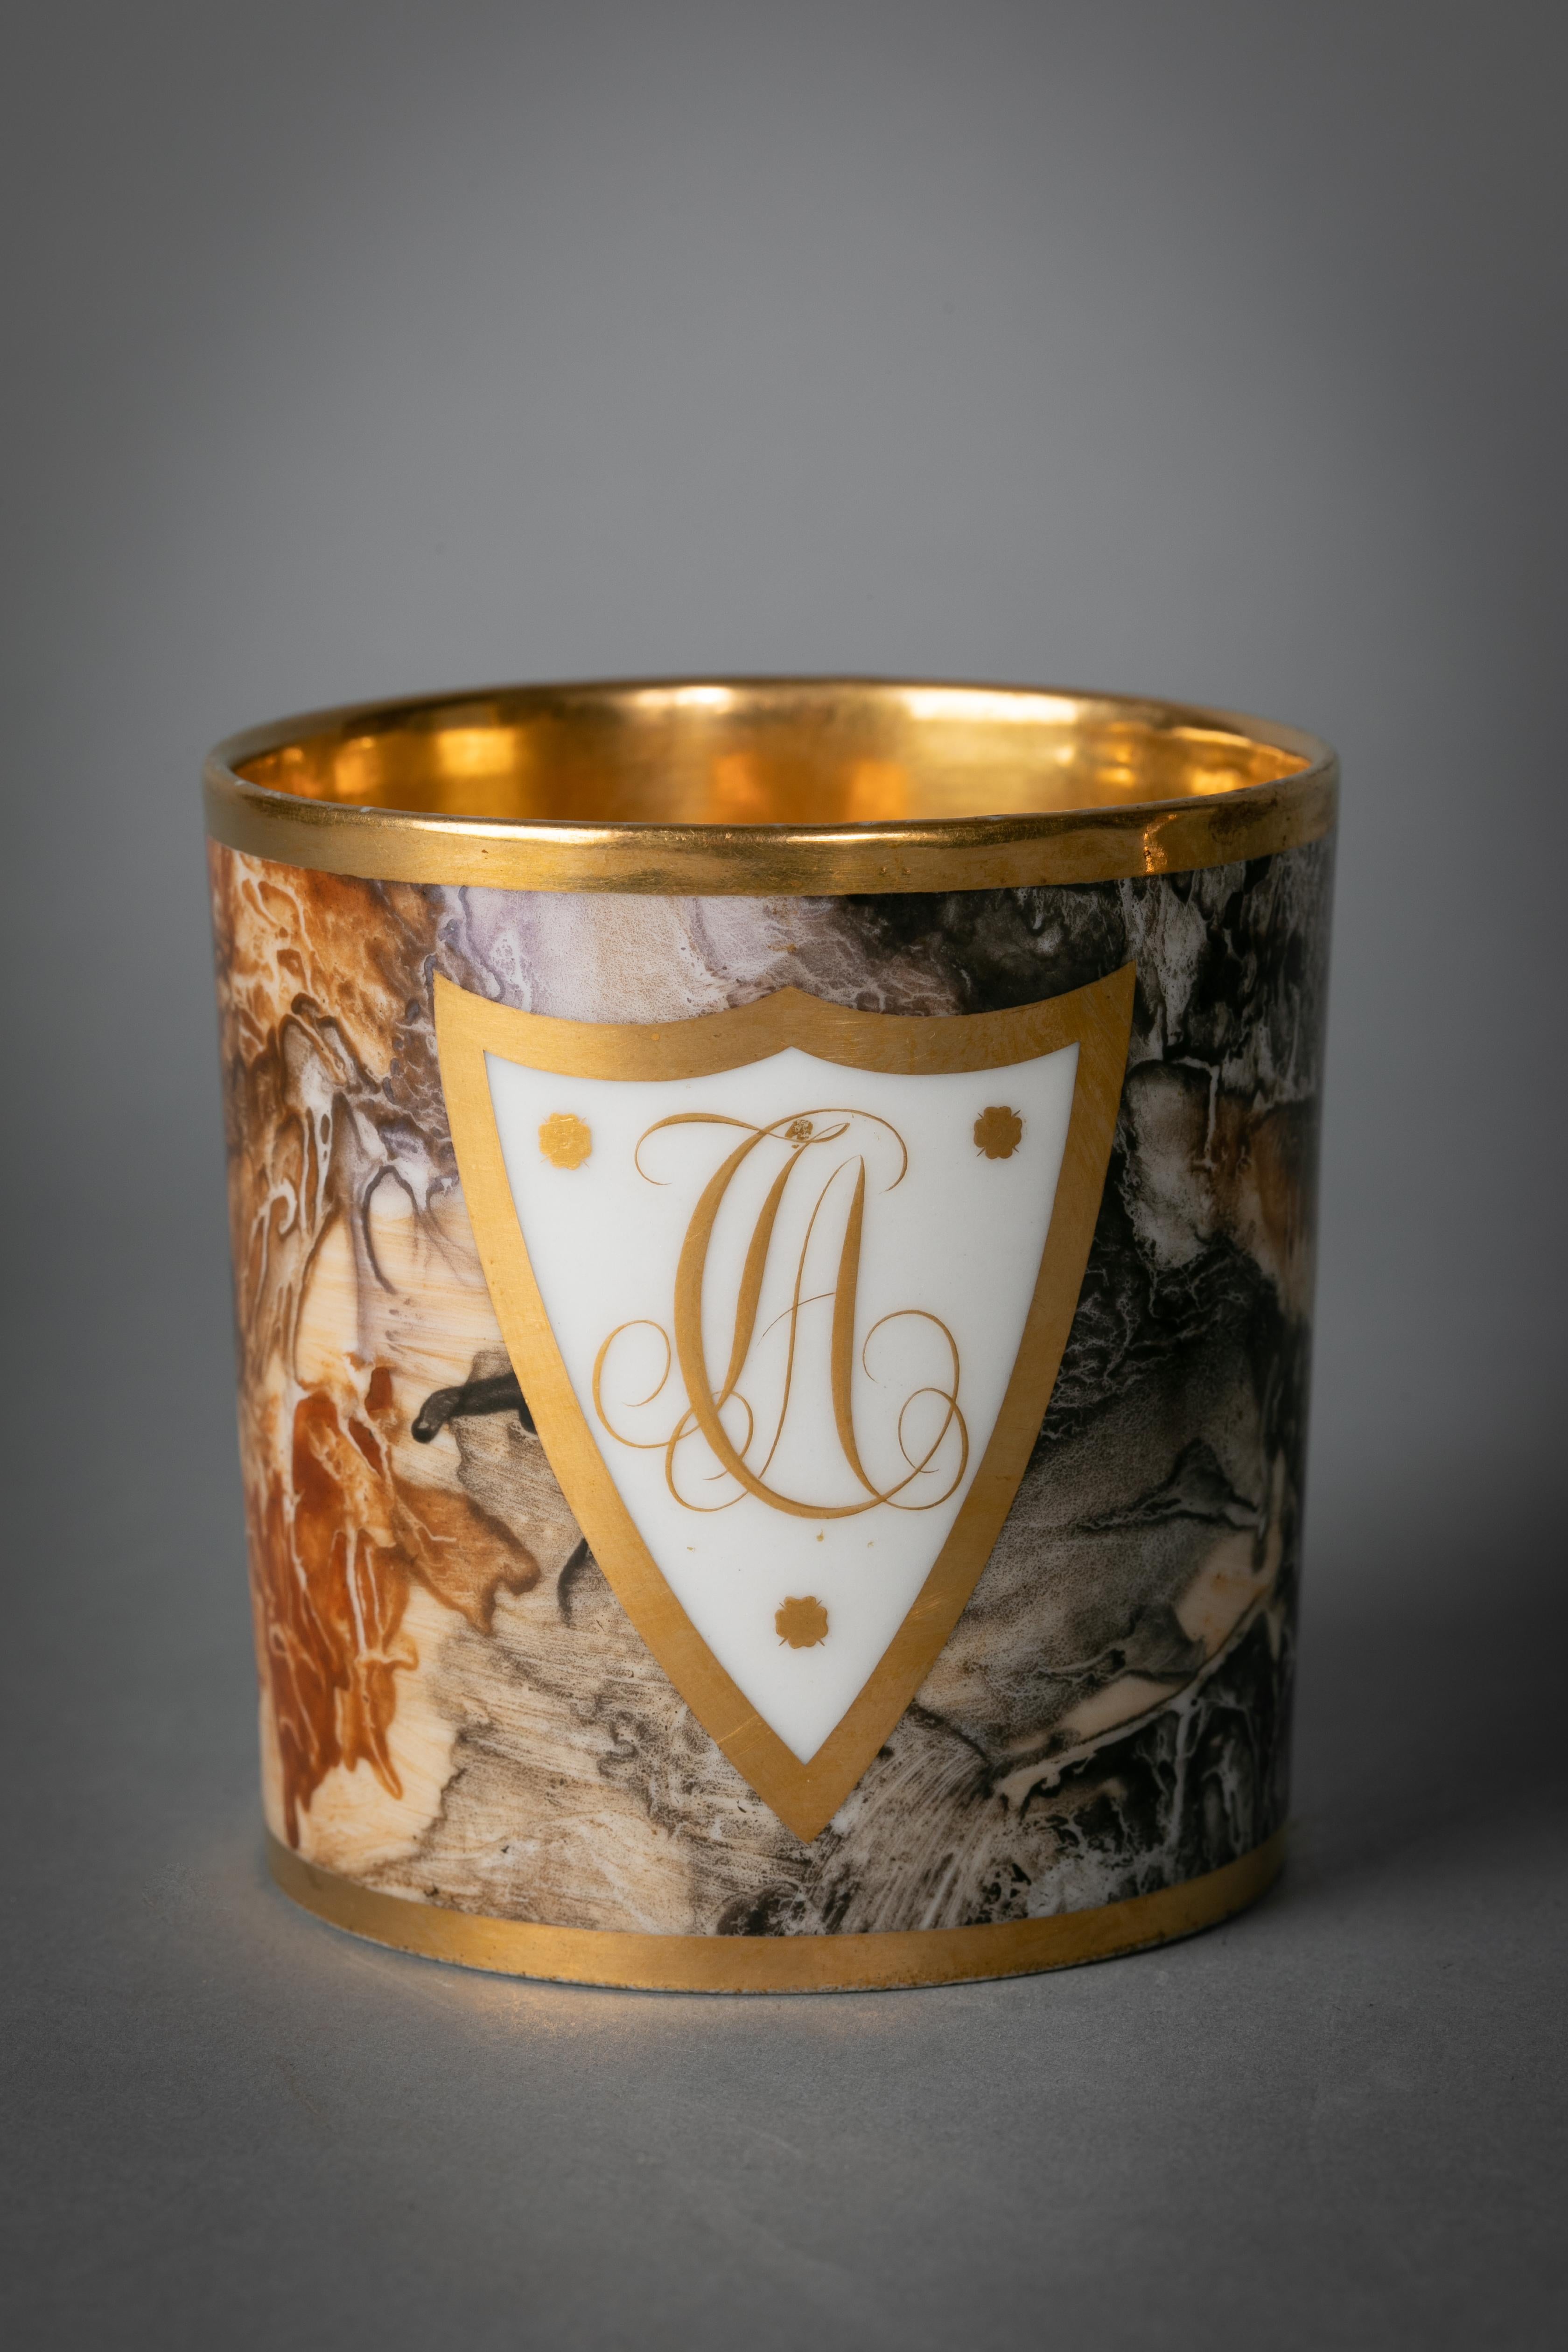 With faux bois decoration and monogrammed.